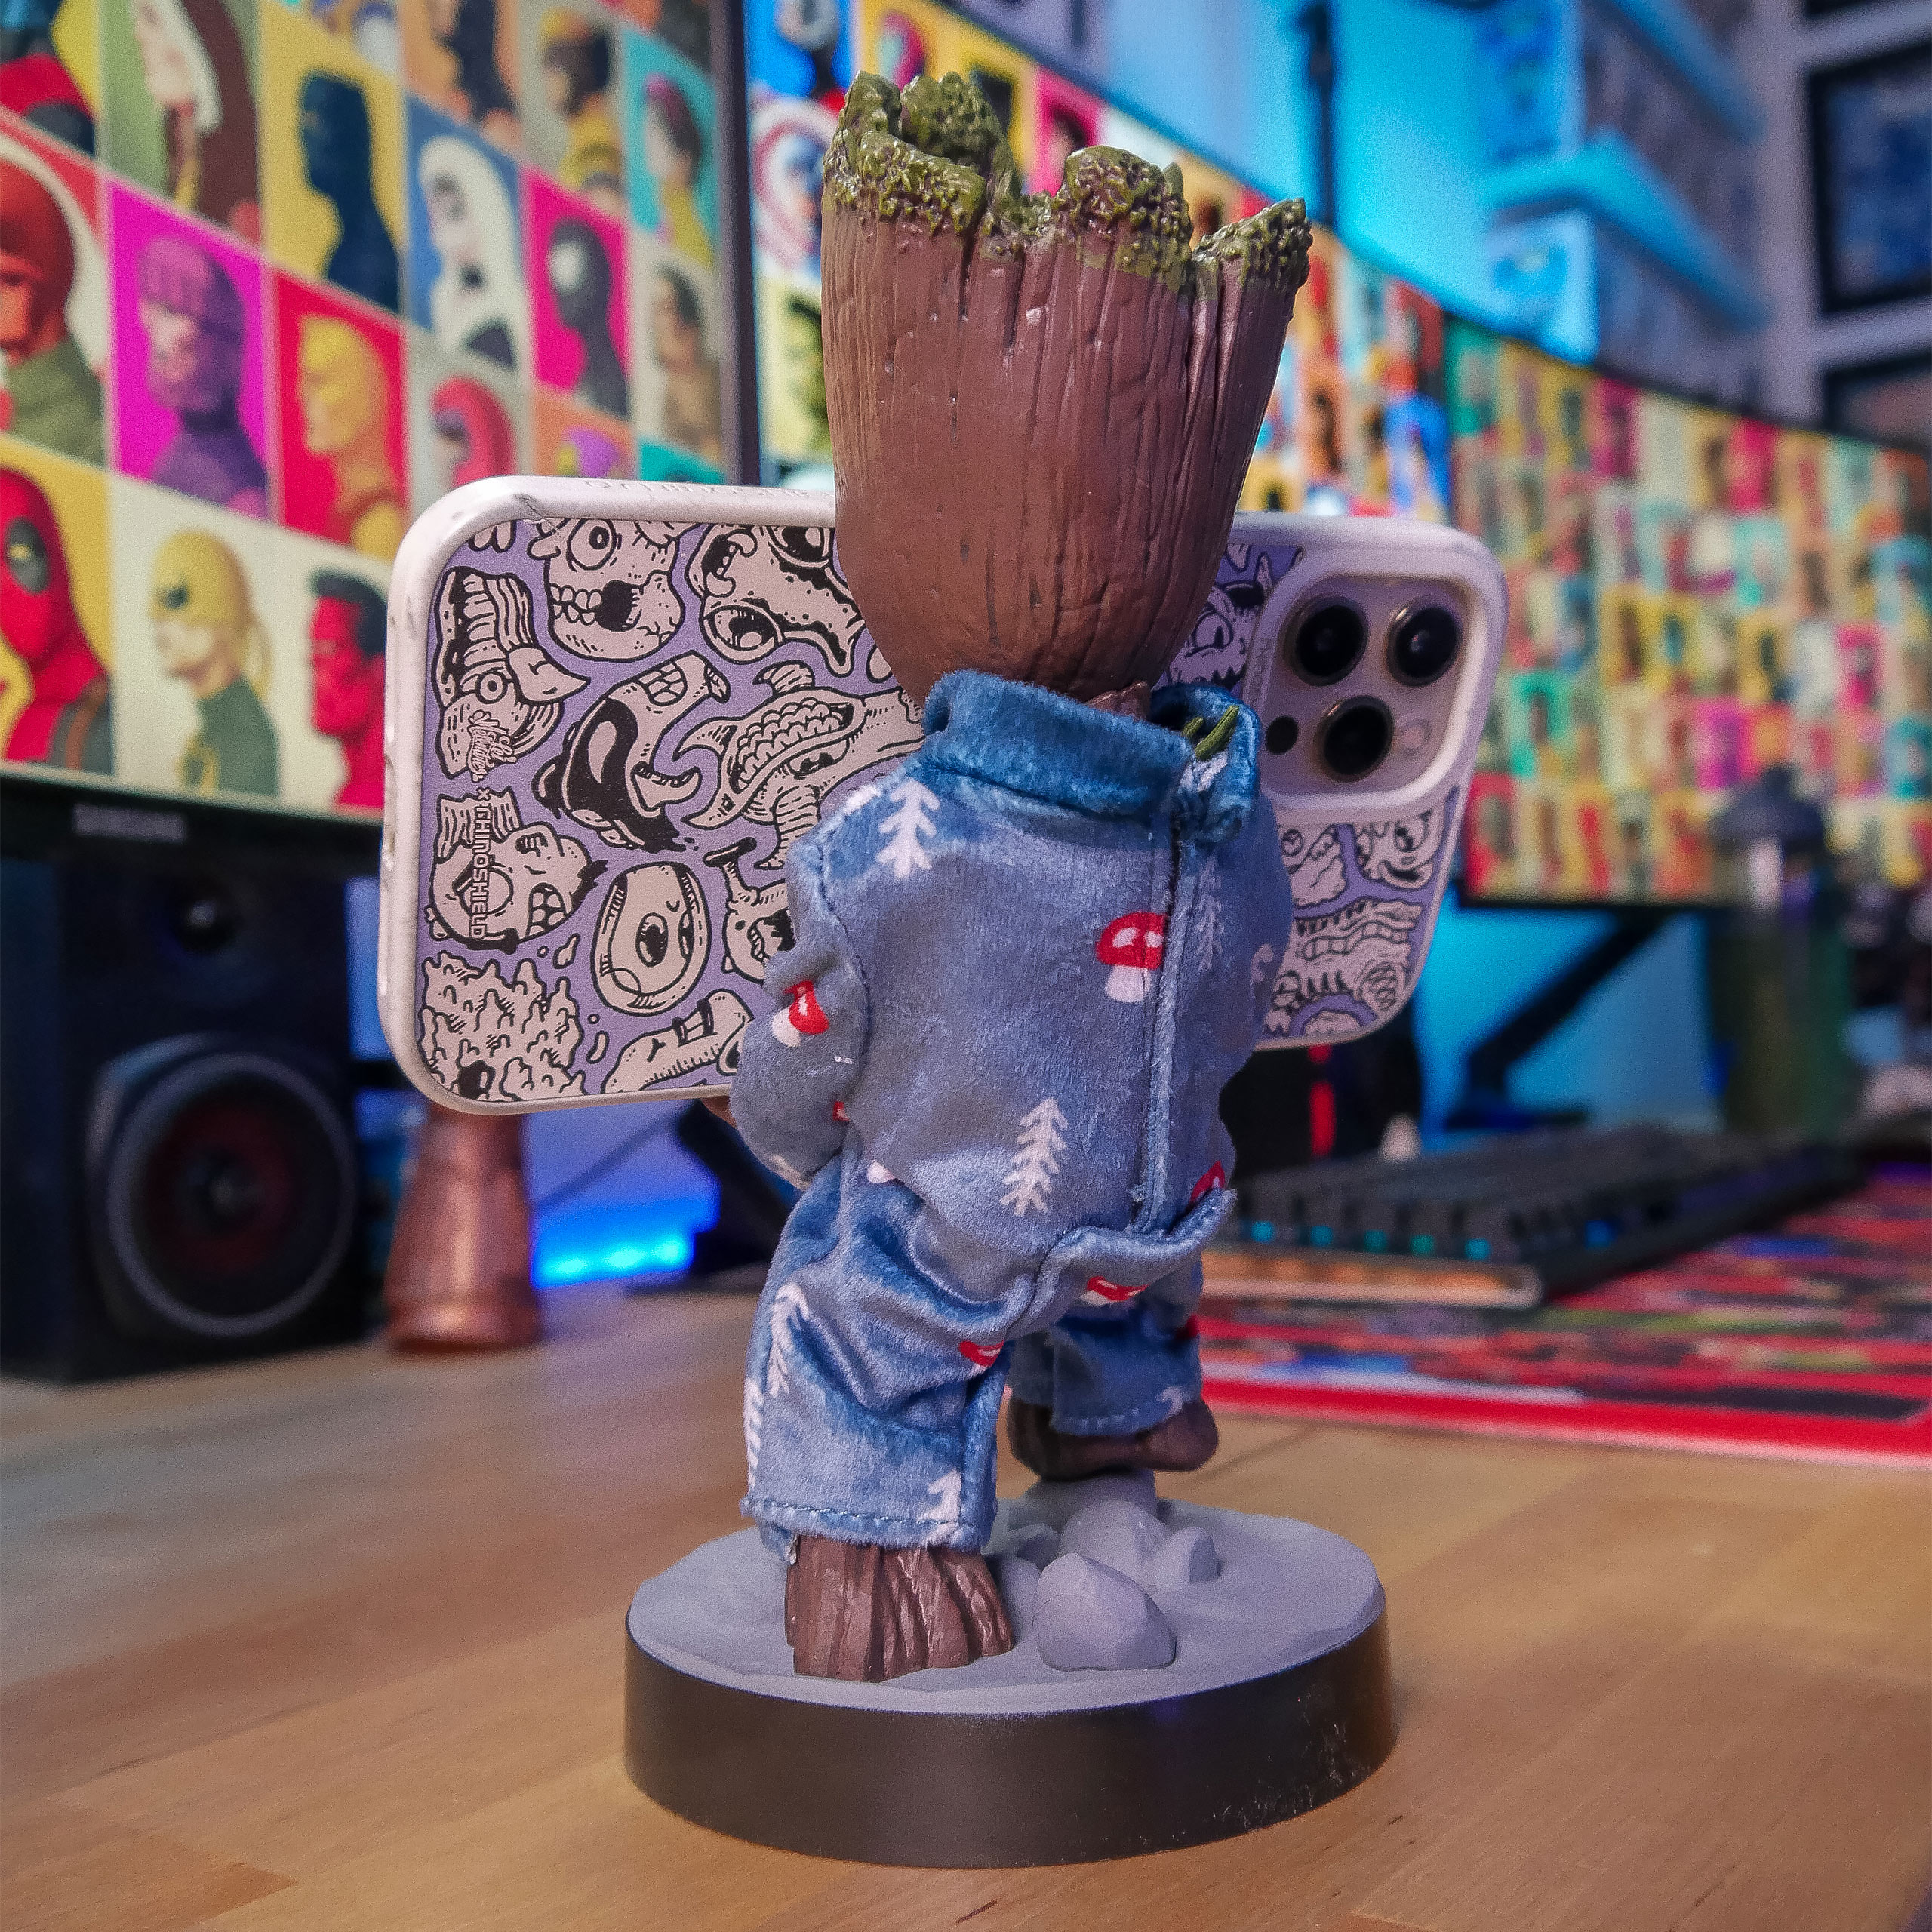 Guardians of the Galaxy - Pyjama Groot Cable Guy Figur